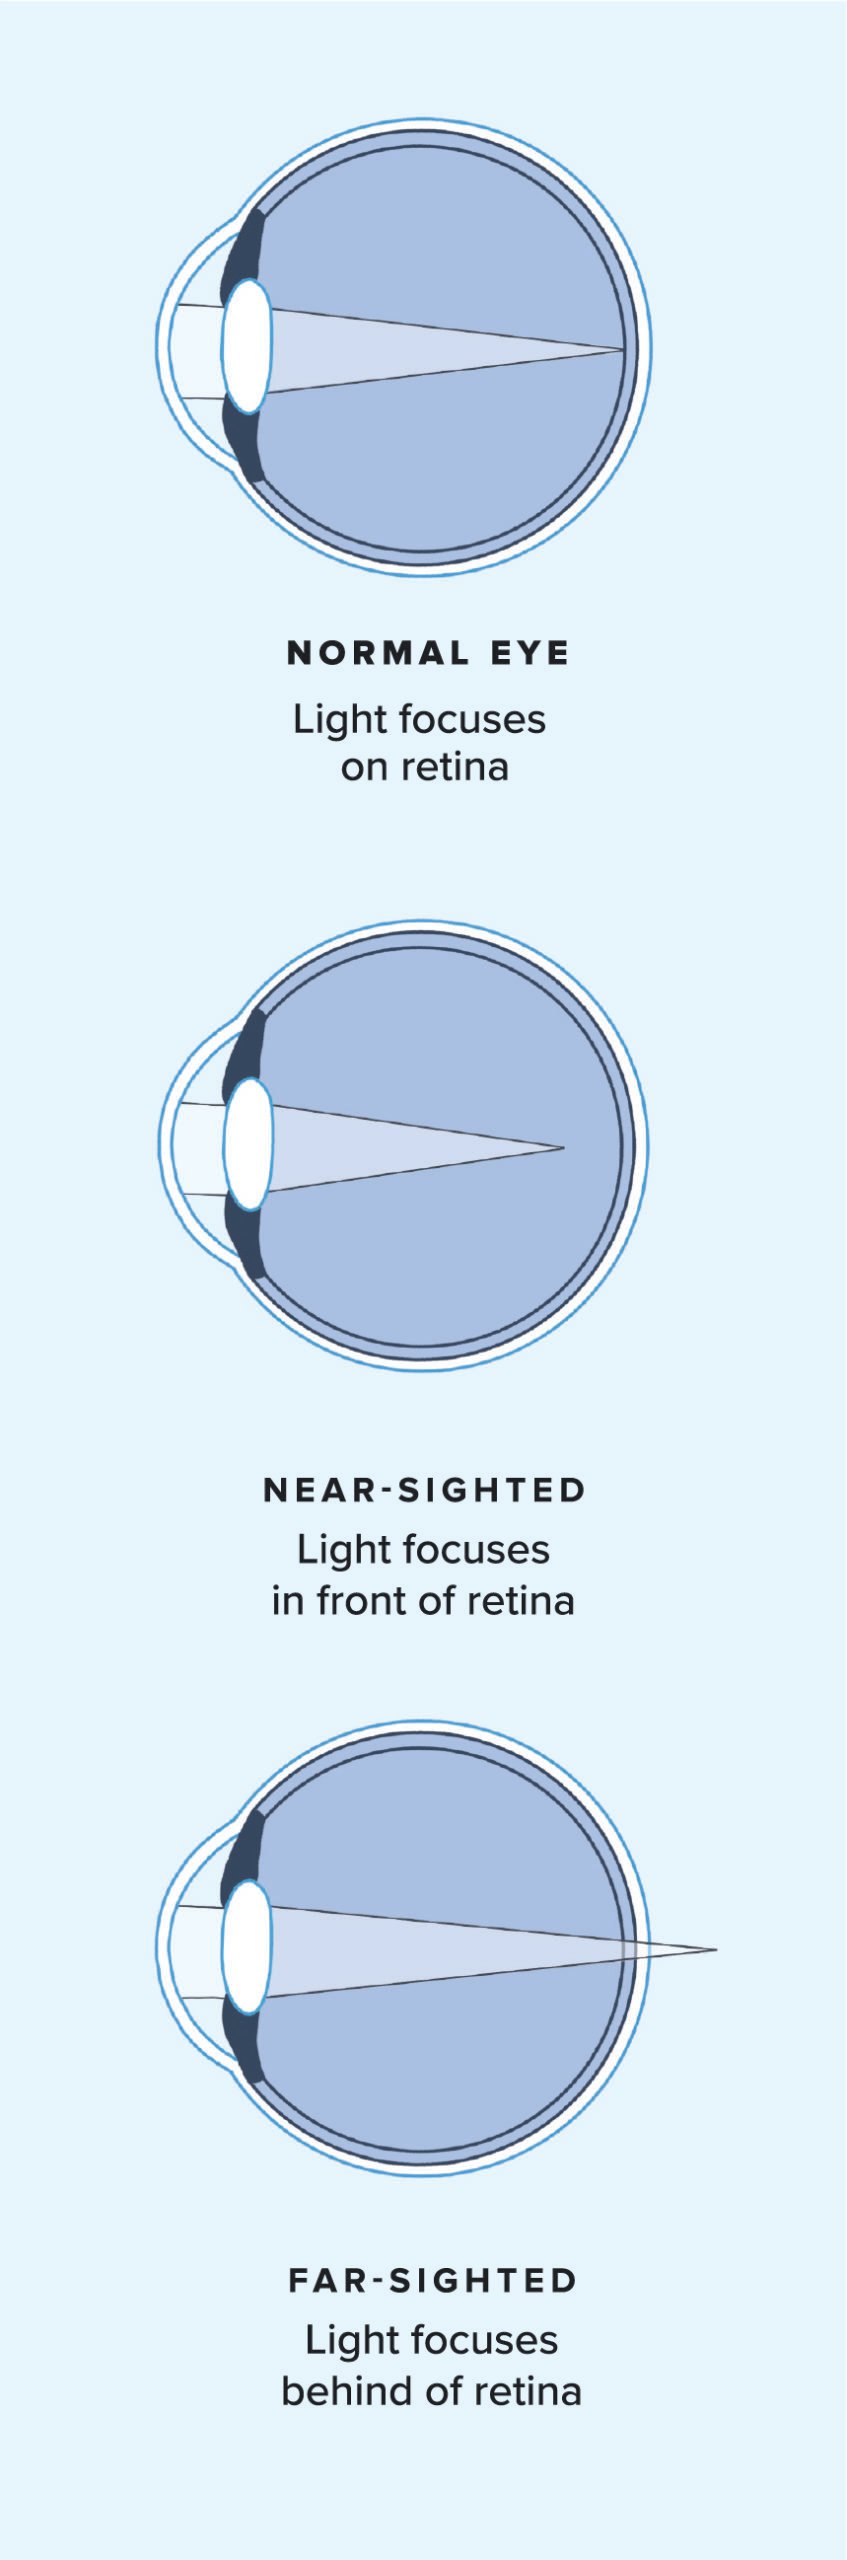 Diagram of how light focuses in a normal eye, a nearsighted eye, and a farsighted eye